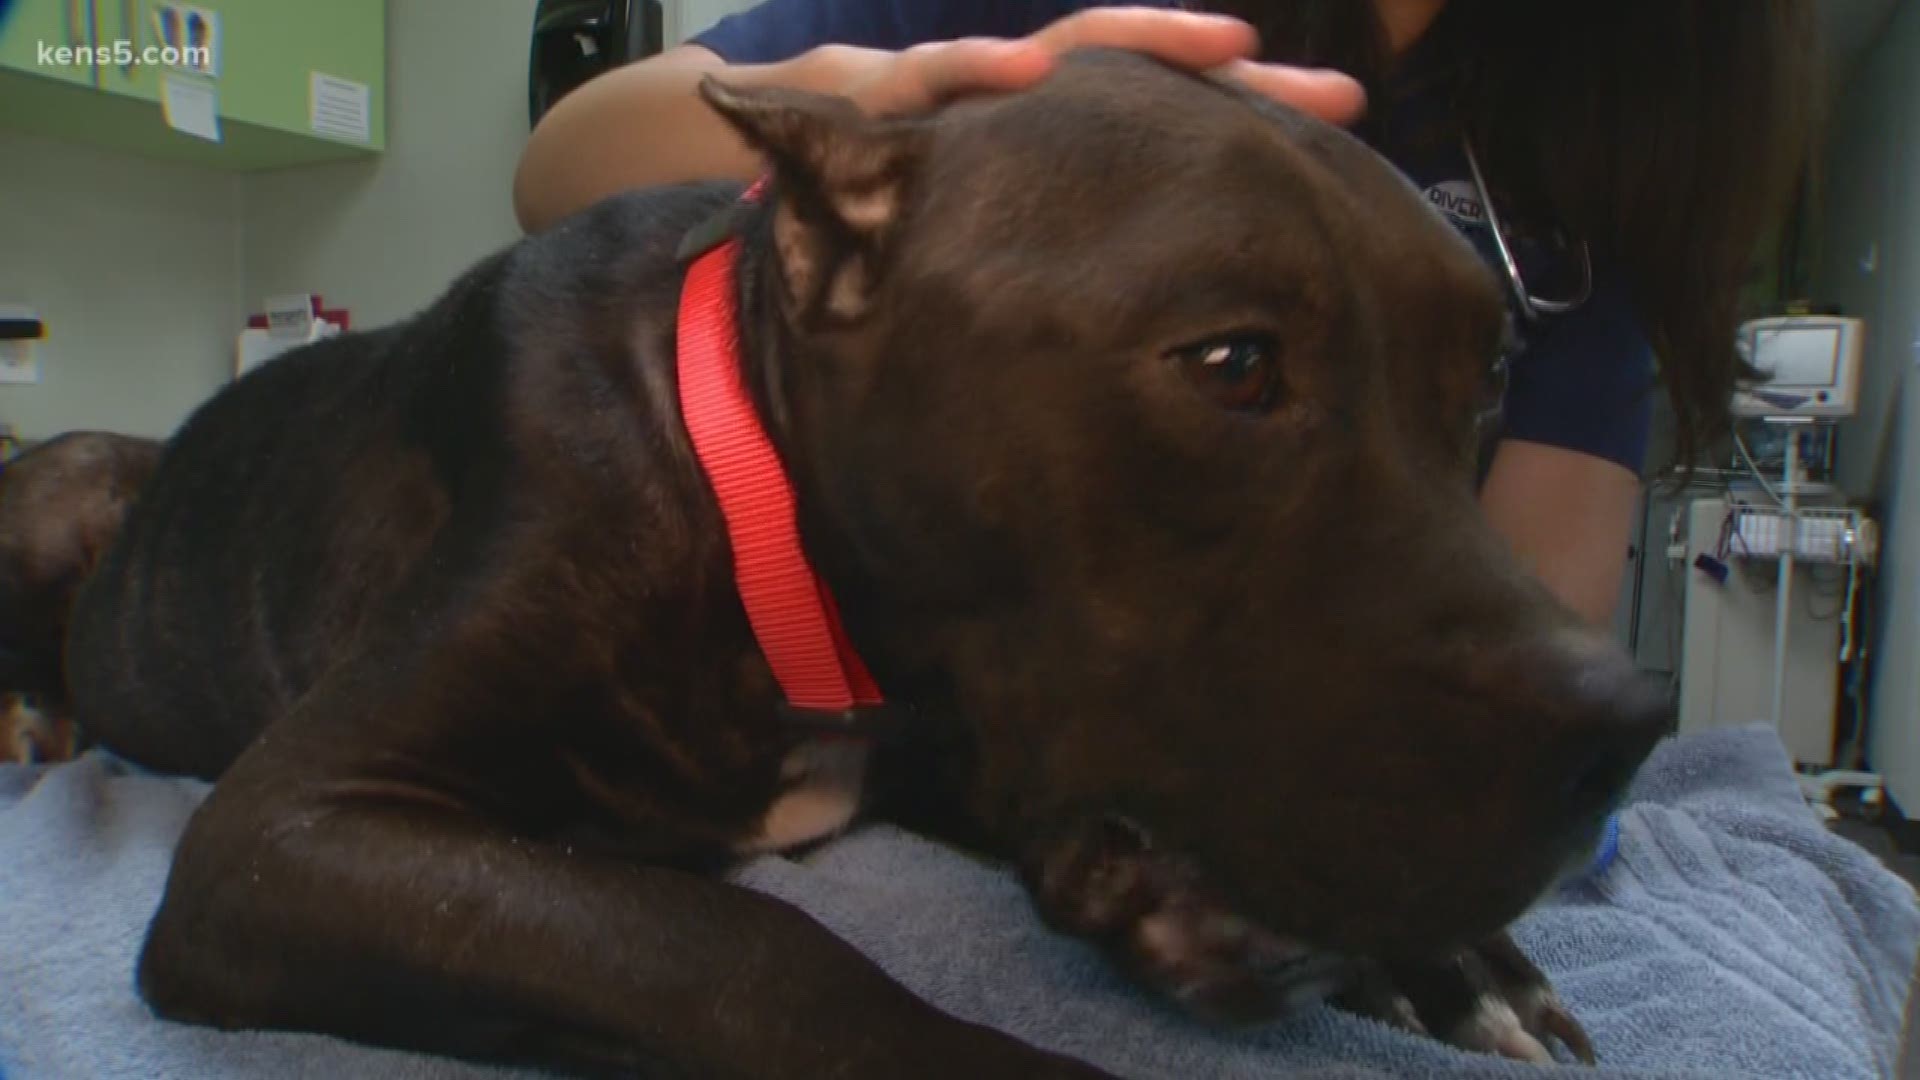 Animal Care Services discovered a neglected and malnourished dog next to a dead dog in the back yard of a home. Now a veterinarian is stepping up to give the surviving dog a second chance. Eyewitness News reporter Jeremy Baker has that story.